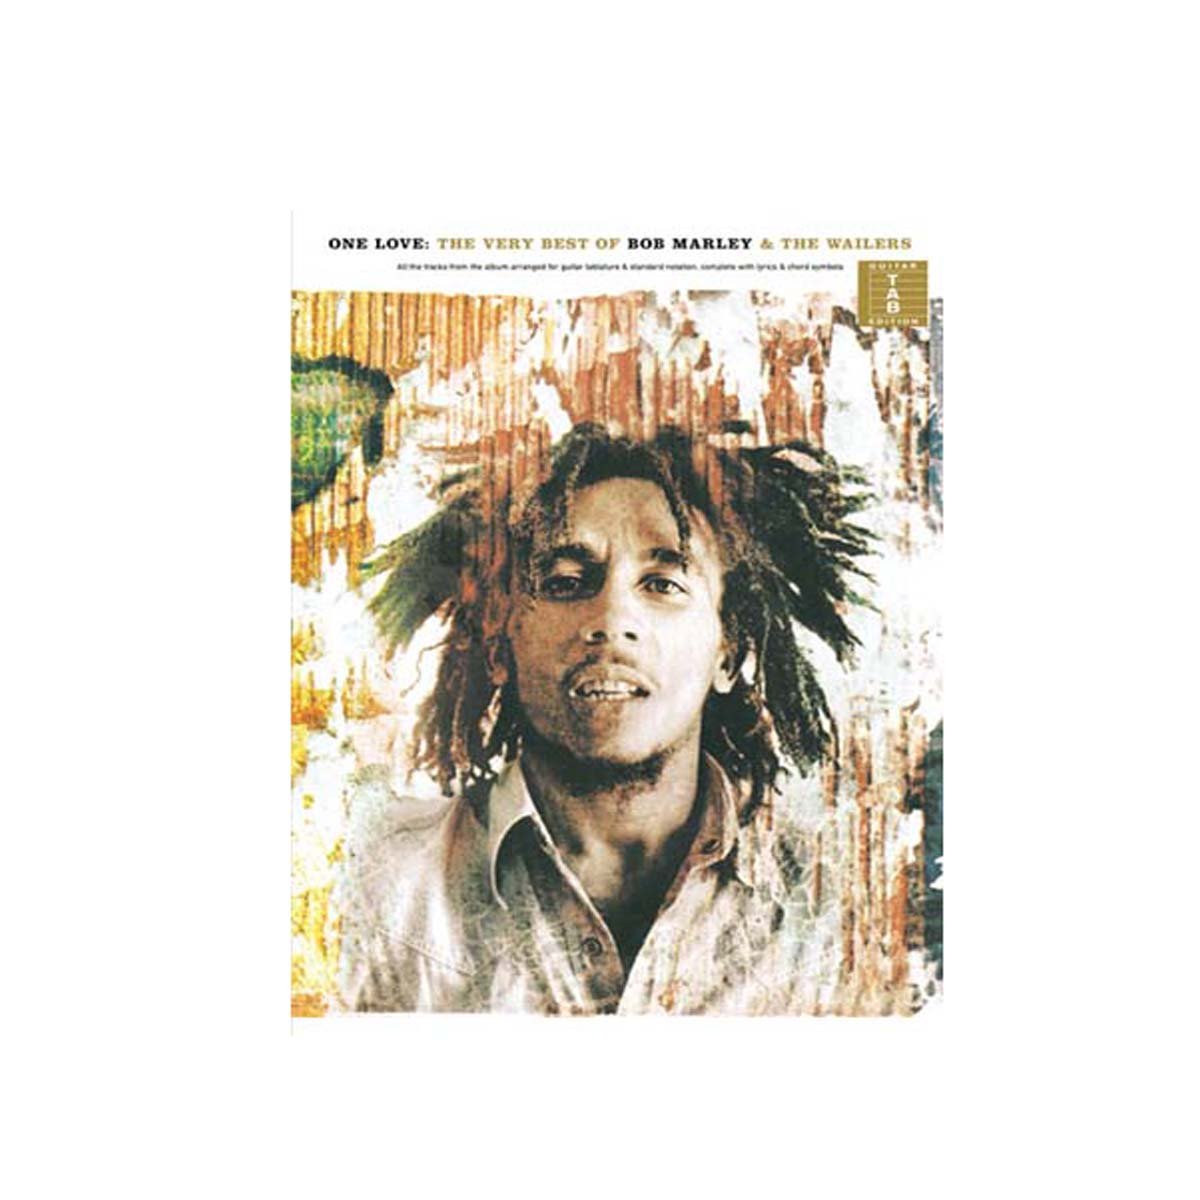 One love: the very best of bob marley and the wailers tab guitare